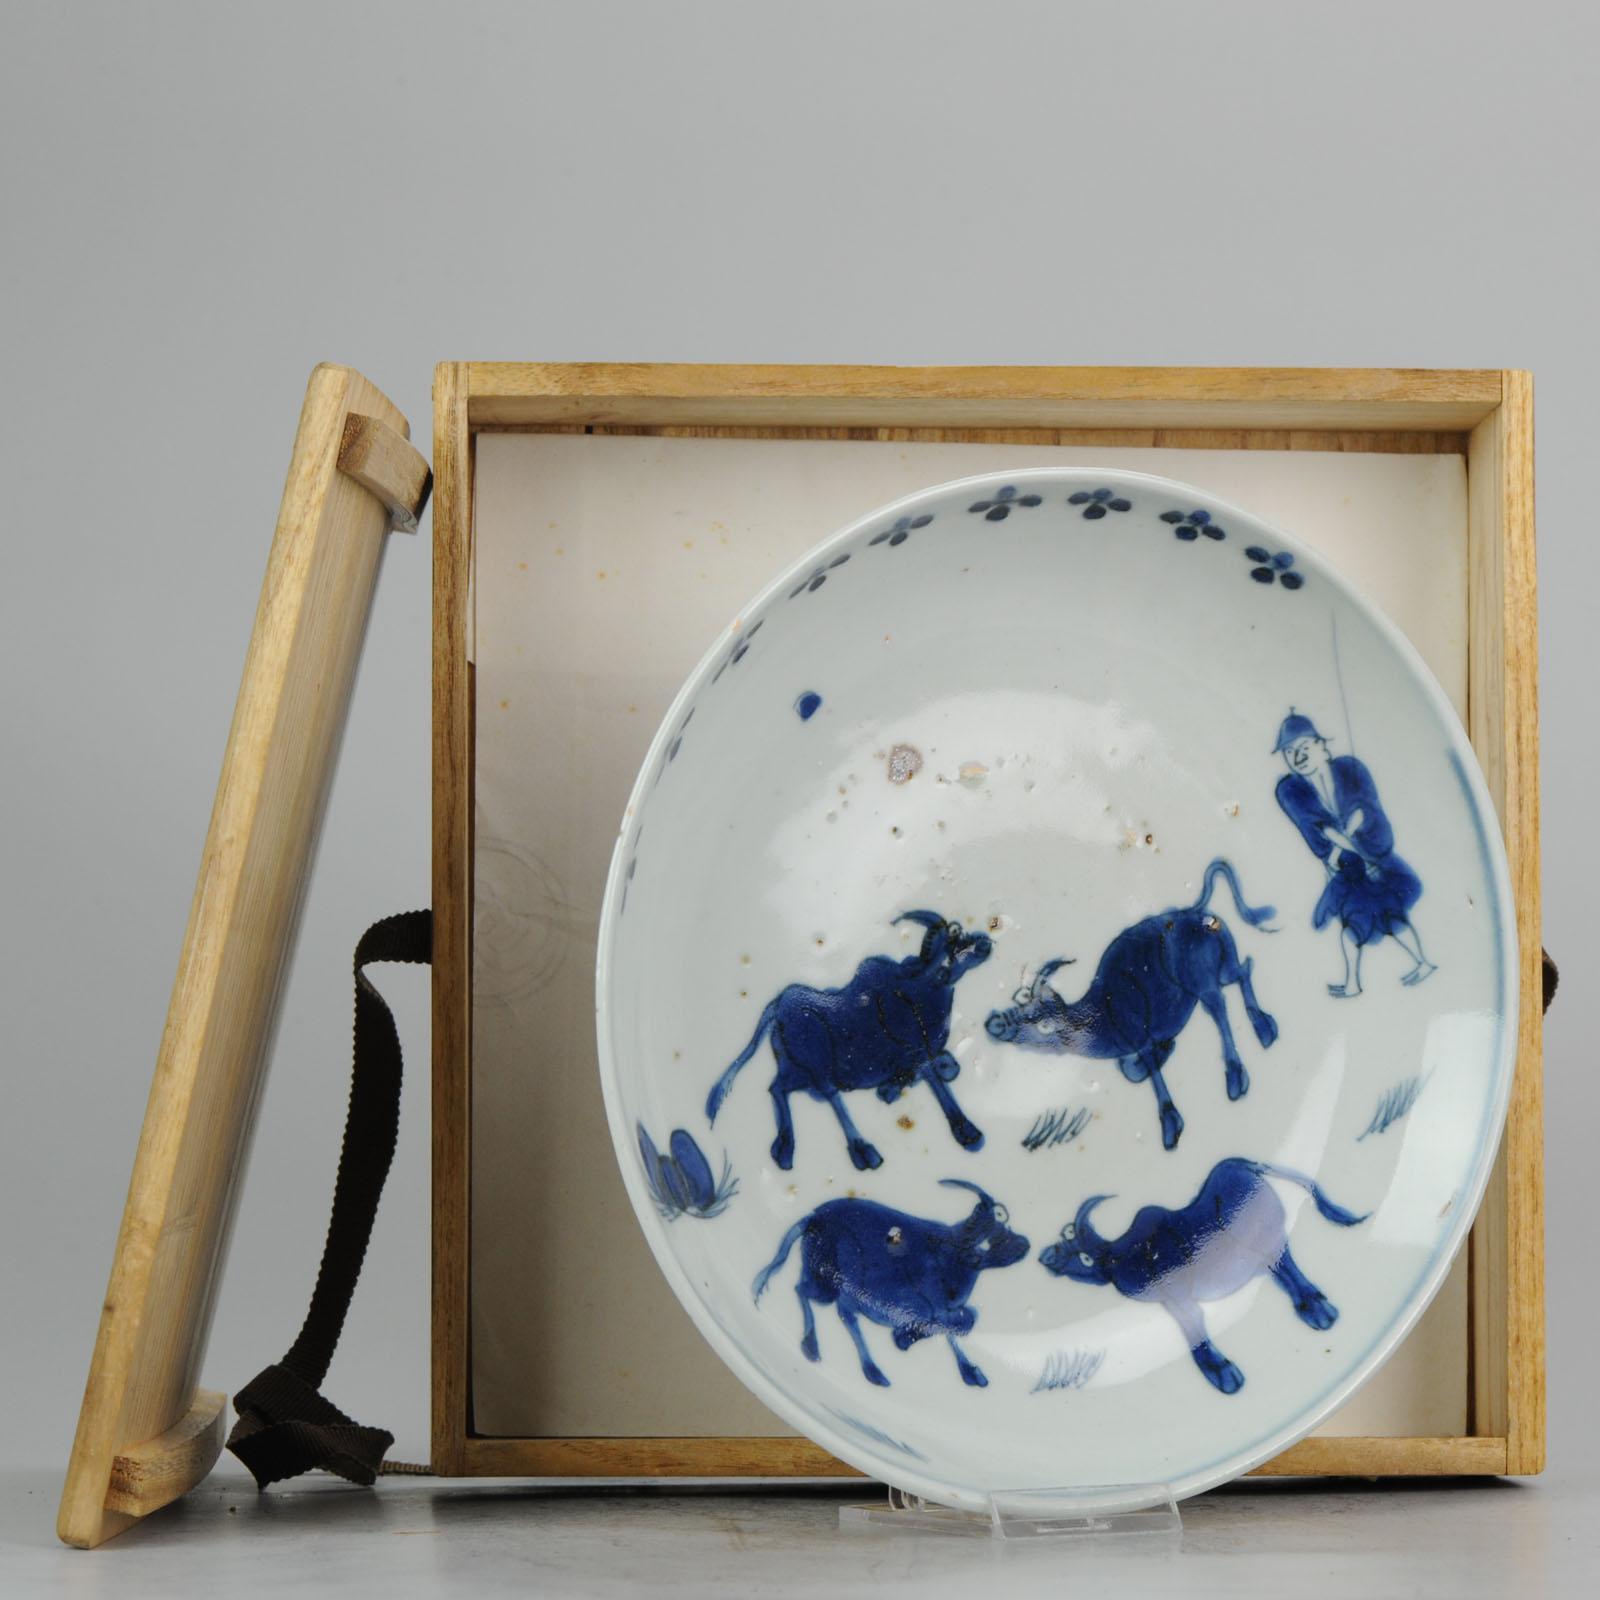 Antique Chinese circa 1600-1640 C Porcelain China Plate Cows and Shepperd For Sale 1